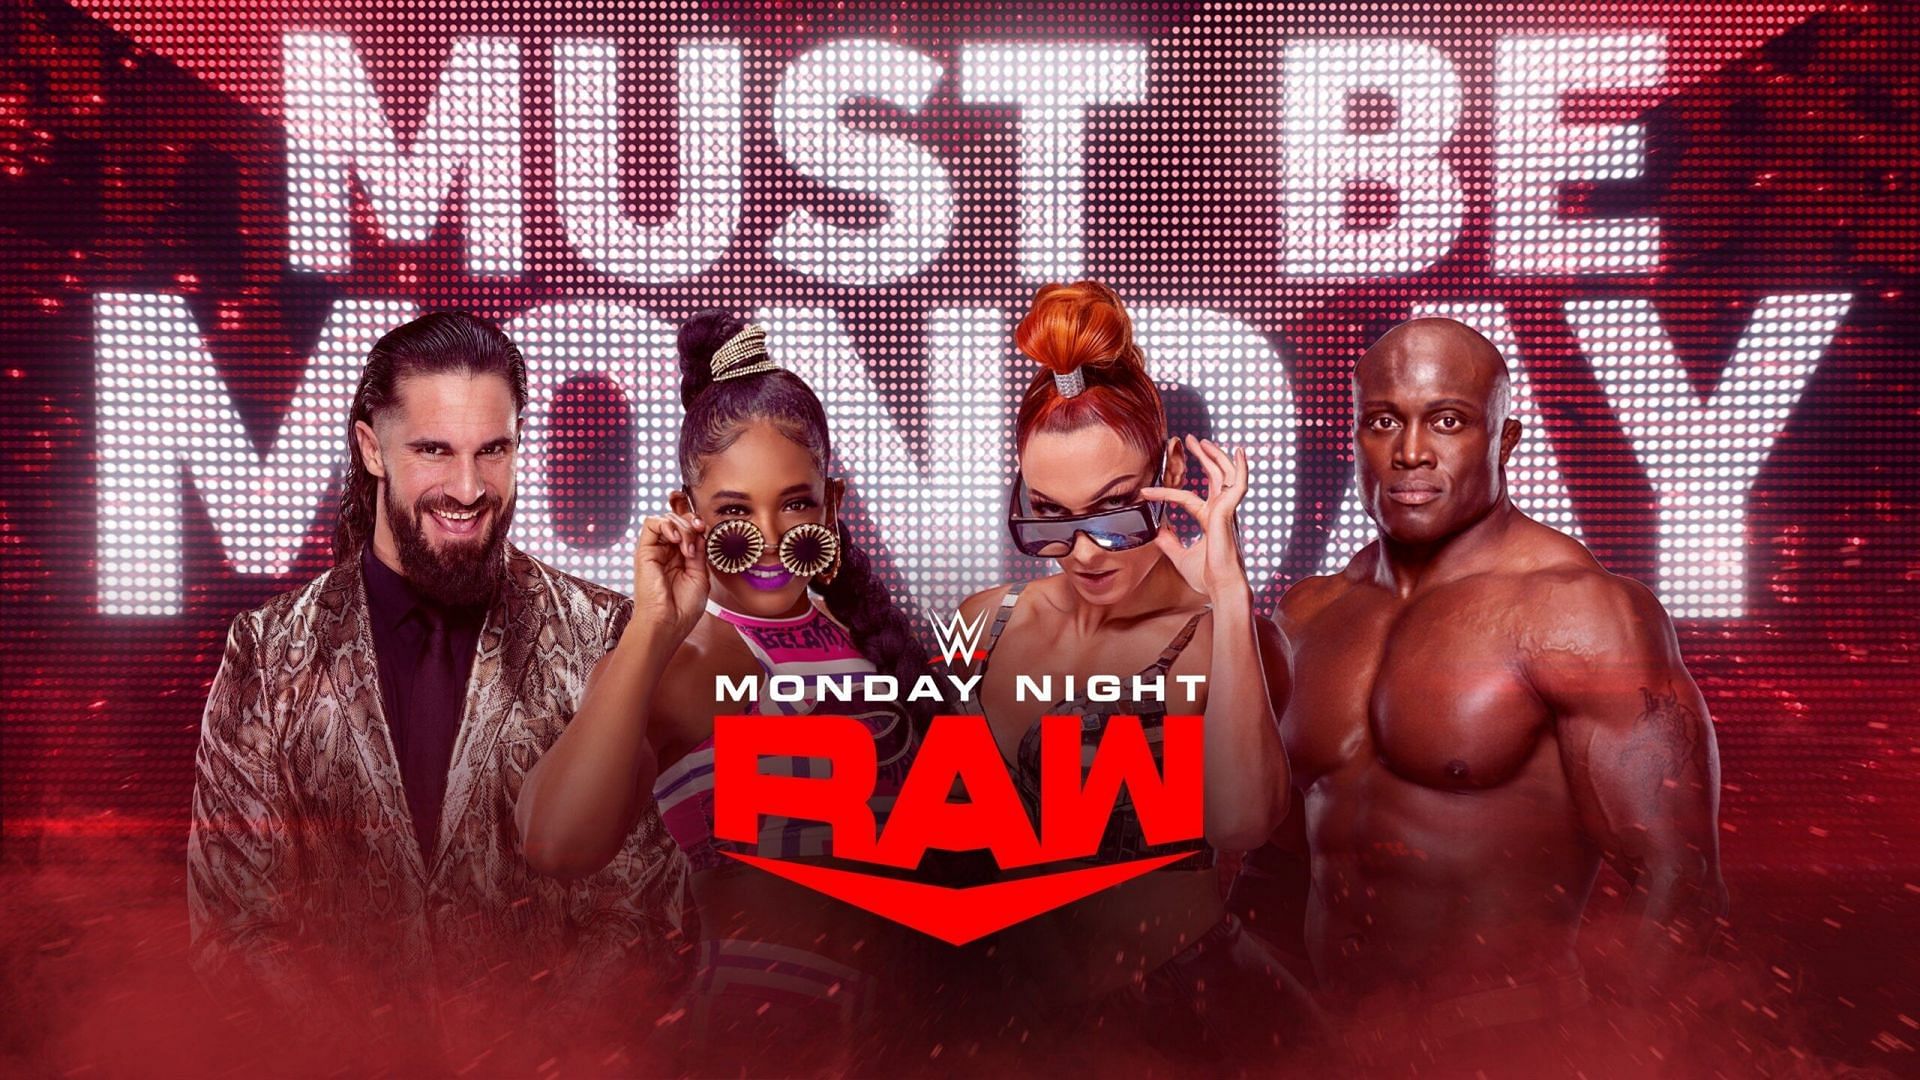 What events are in store for the WWE Monday Night Raw after WrestleMania 39?